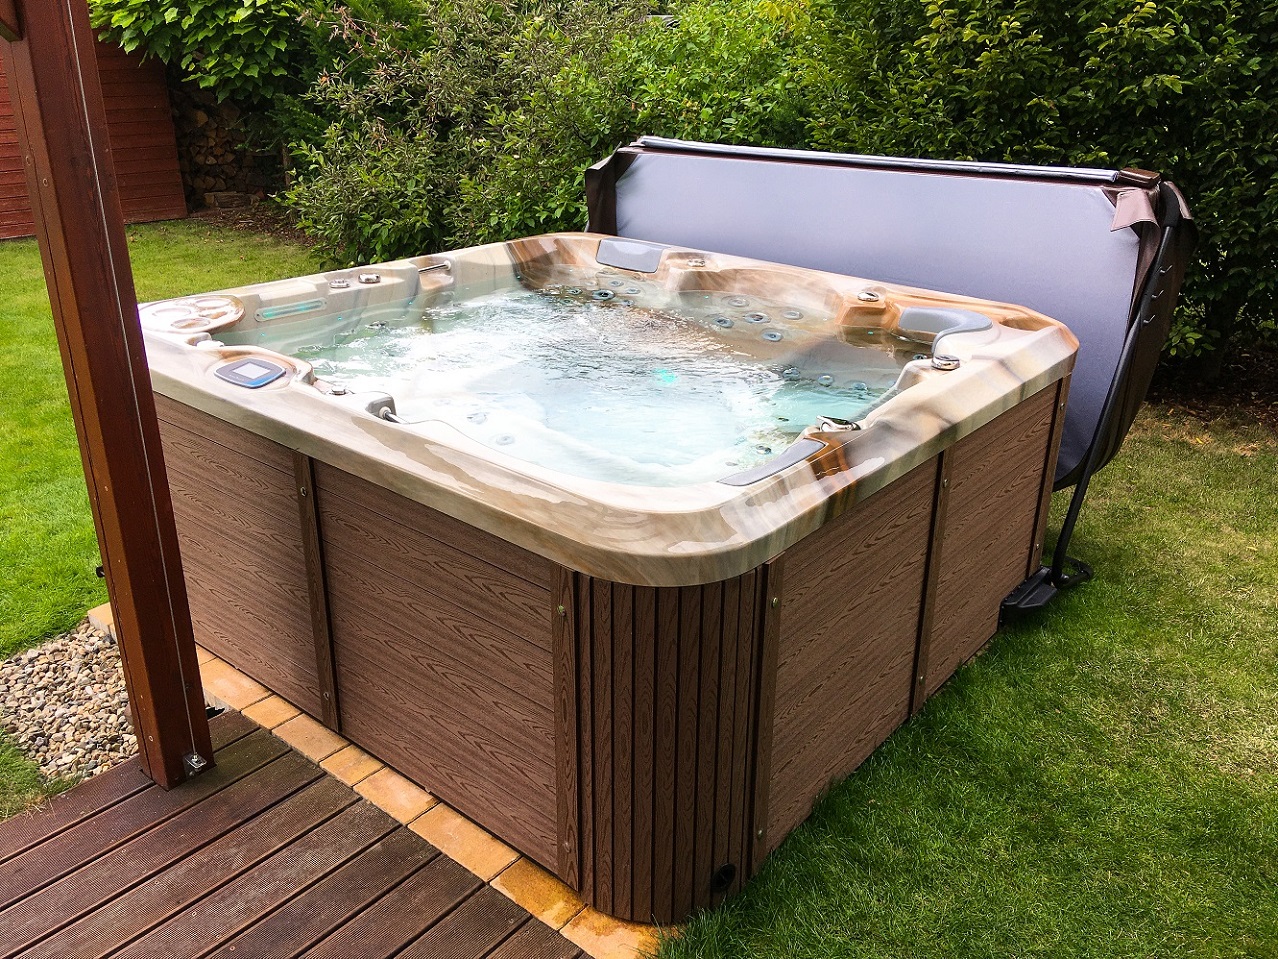 Delphina 3gen outdoor family whirlpool - Canadian Spa International® for all-year-round use - Spa-studio